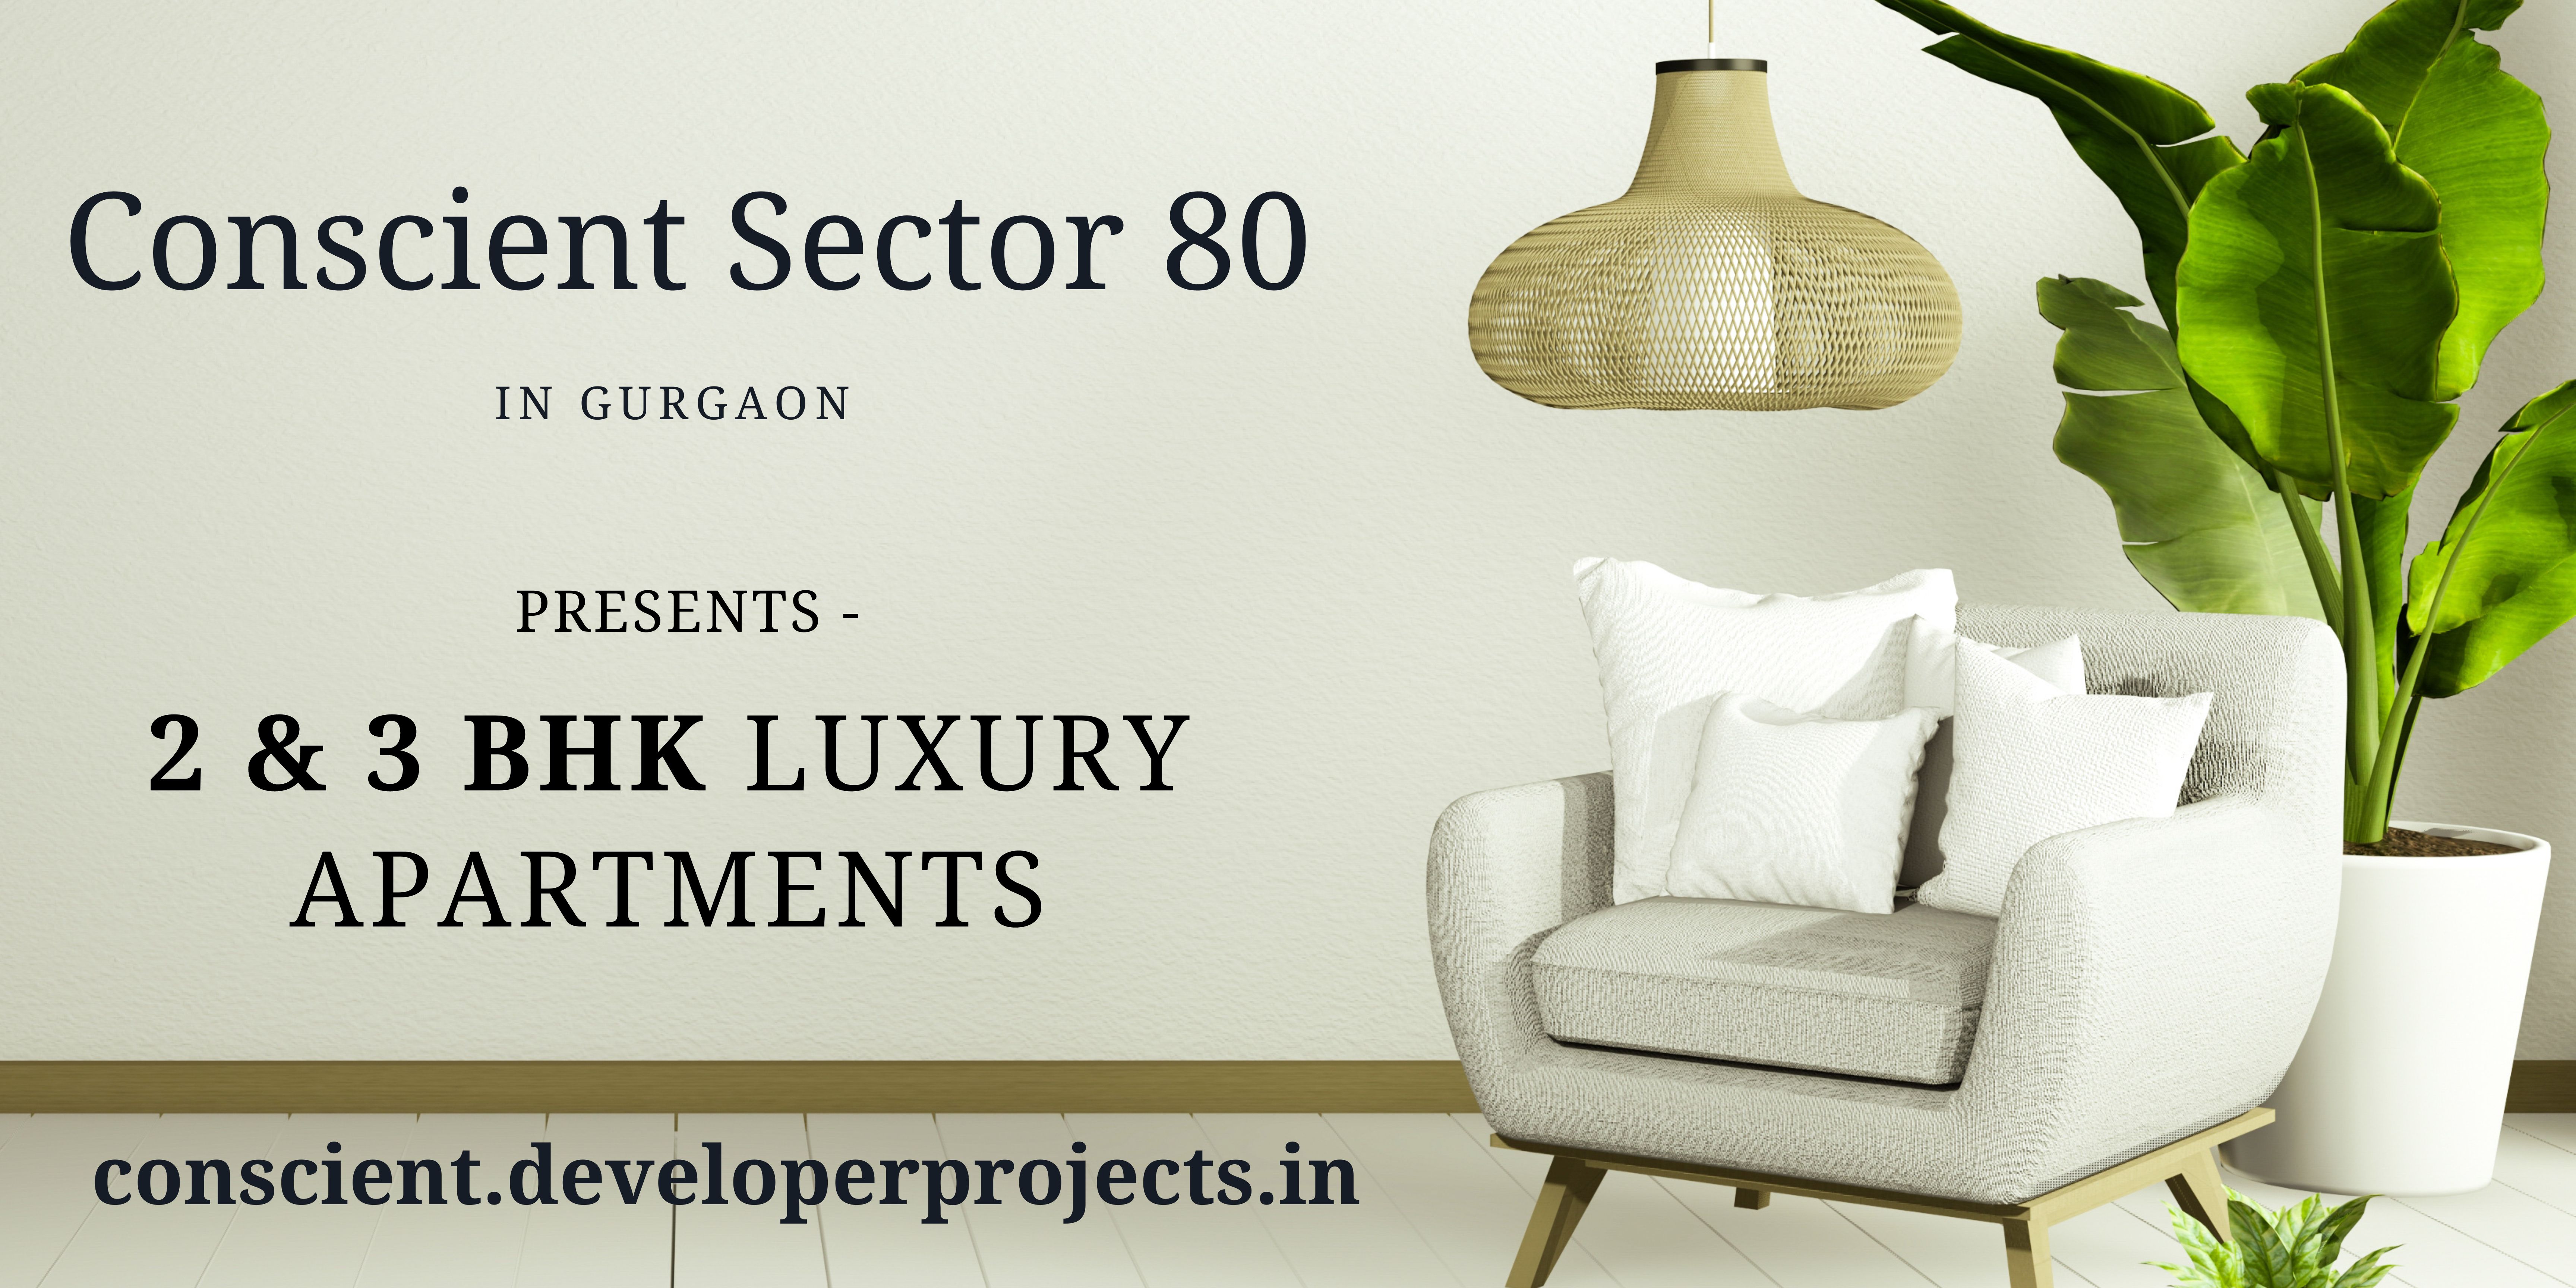 Conscient Sector 80 Upcoming Apartments In Gurgaon - Your Comfort Zone